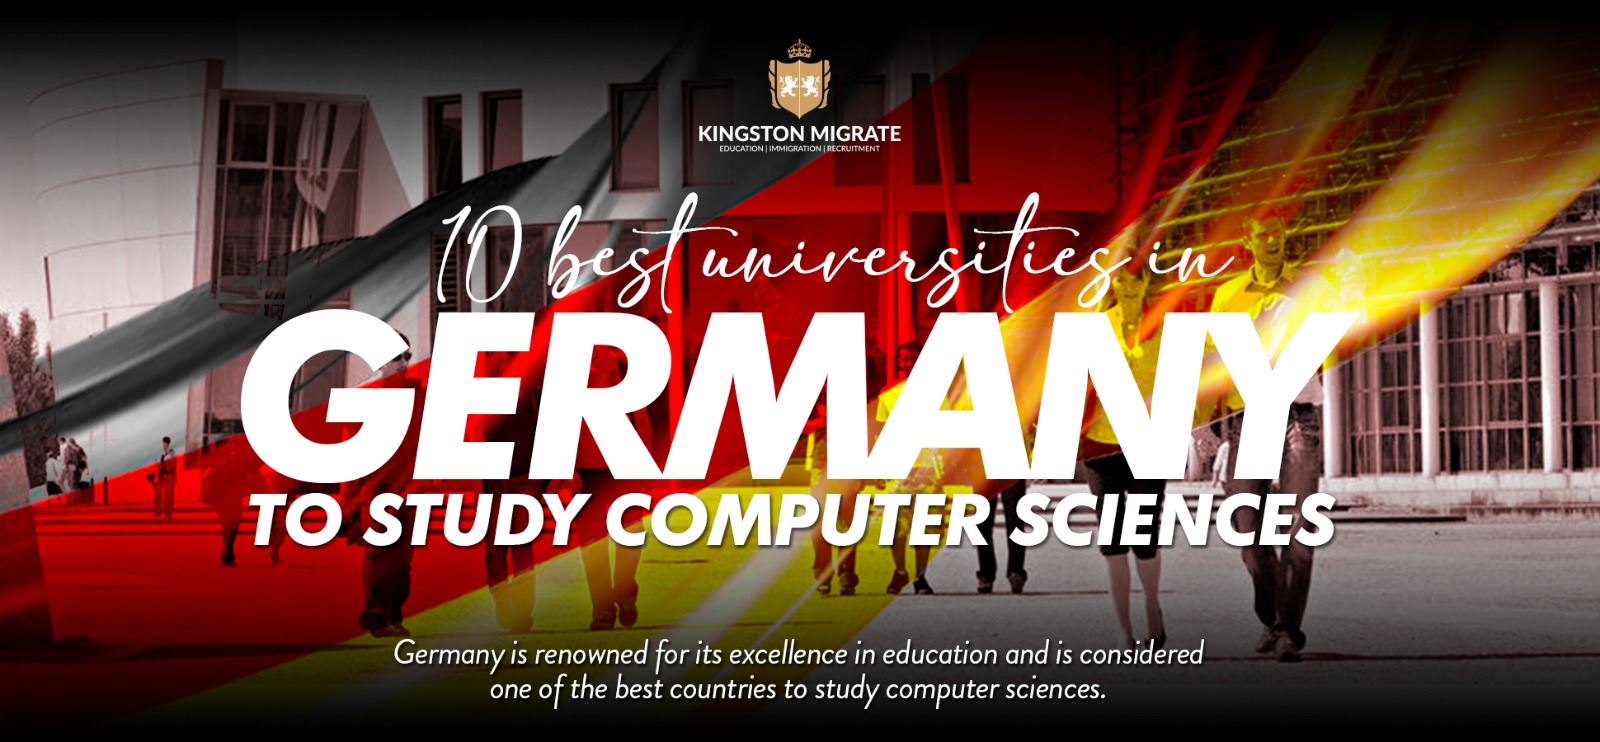 10 Best Universities in Germany to Study Computer Sciences